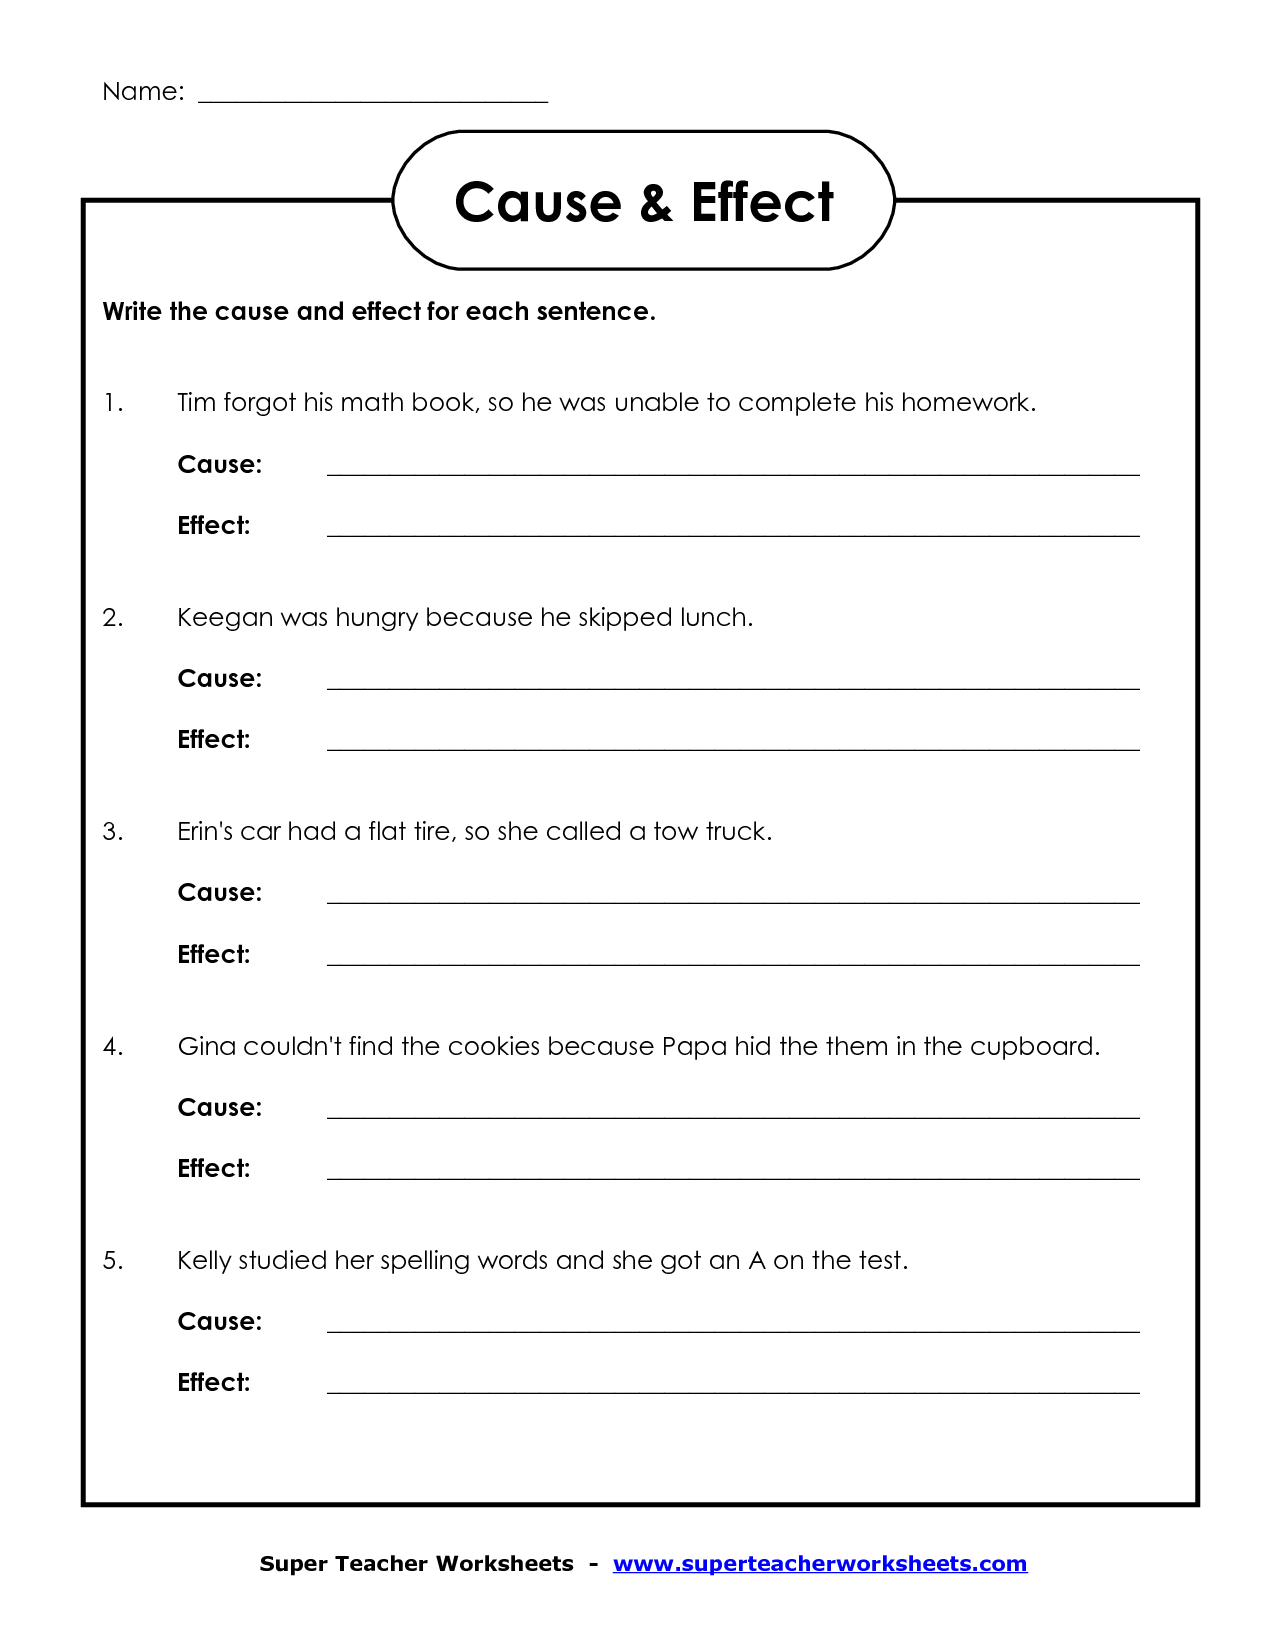 Cause and Effect Worksheets 1st Grade Image